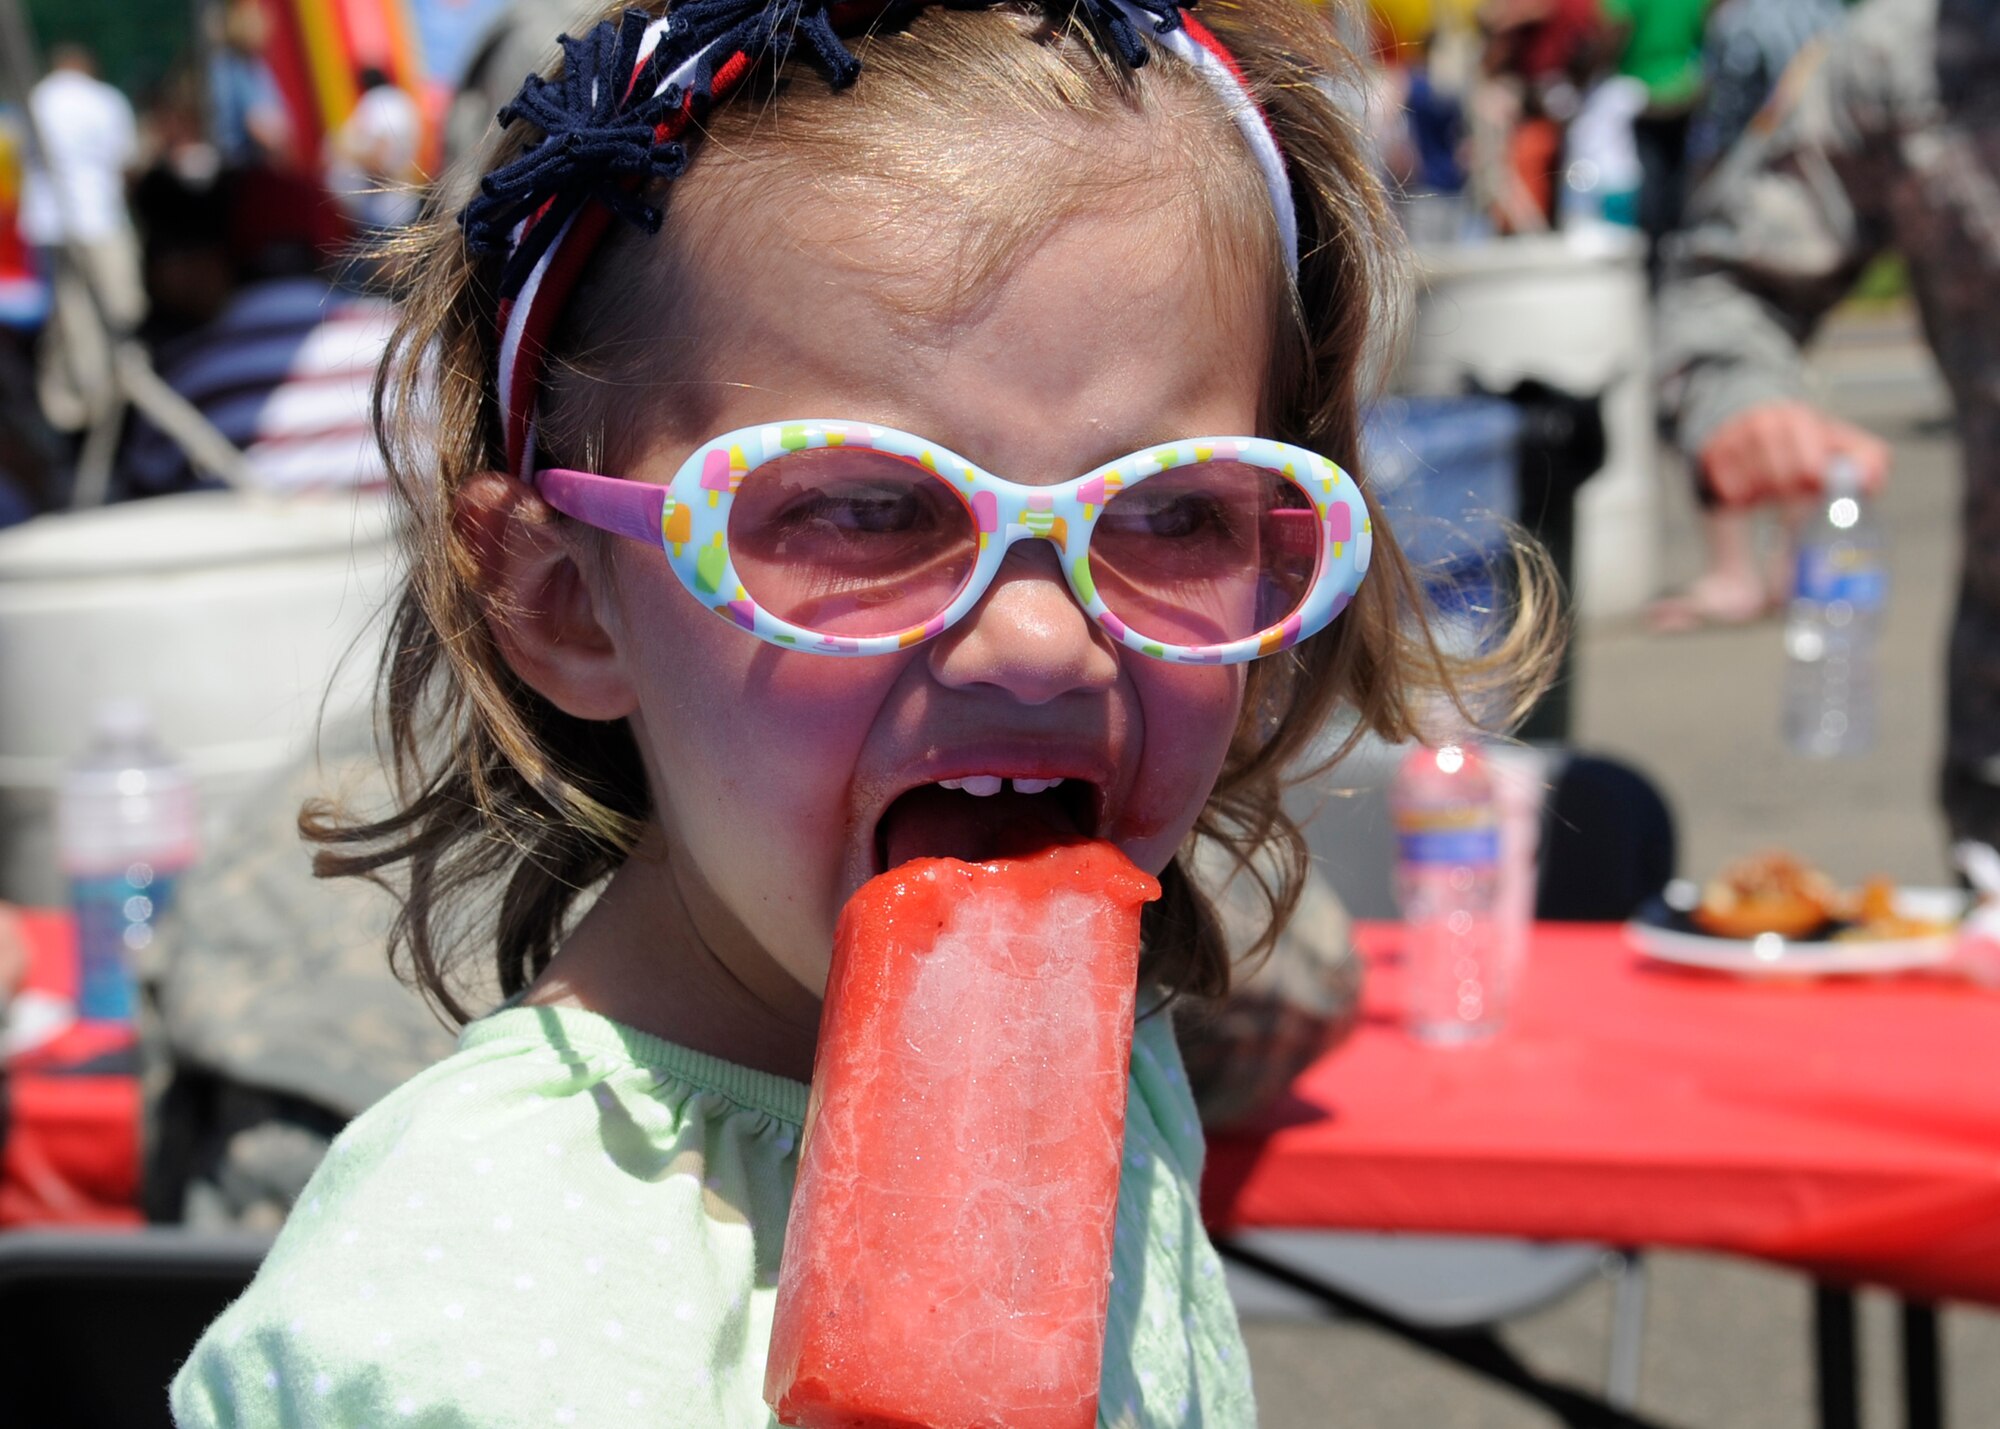 BUCKLEY AIR FORCE BASE, Colo. -- Alexandra Valdes, daughter of Sgt. Adam Valdes, 743rd Military Intelligence Battalion, devours a frozen treat during Freedom Fest here, July 1.  Along with various foods there were events for children, raffle prize giveaways and live music. (U.S. Air Force photo by Tech. Sgt. Jeromy Cross)